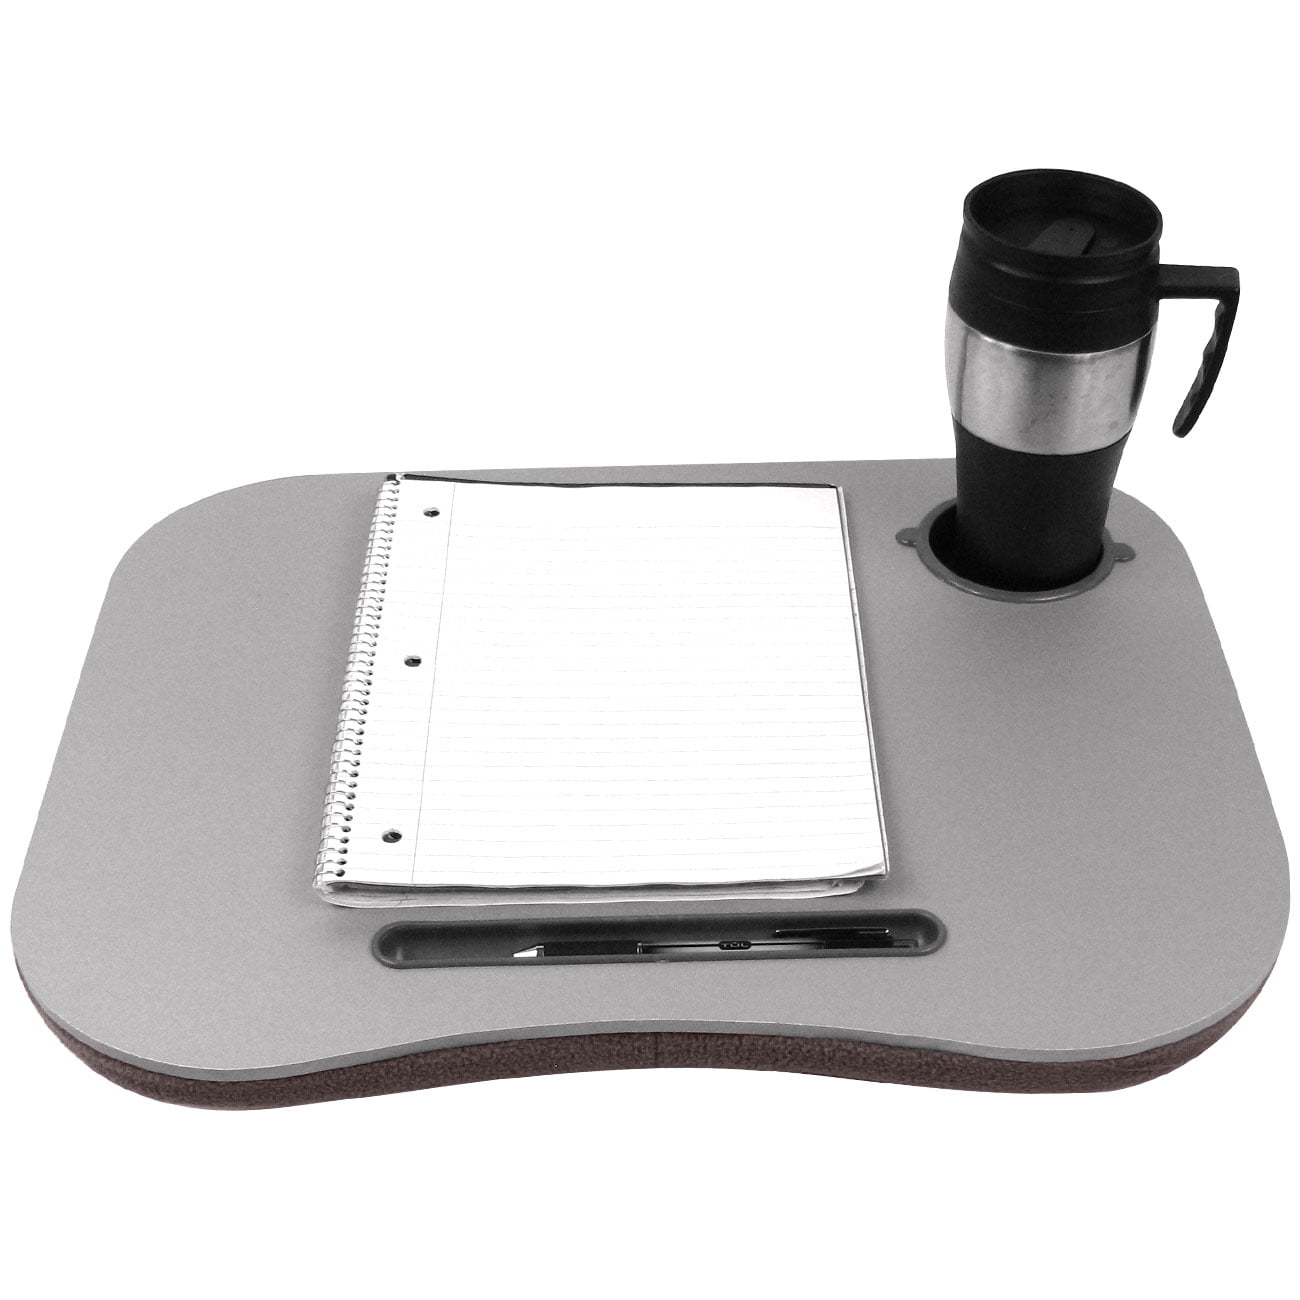 Laptop Lap Desk, Portable With Foam Cushion, LED Desk Light, and Cup Holder  By Northwest (Blue) 